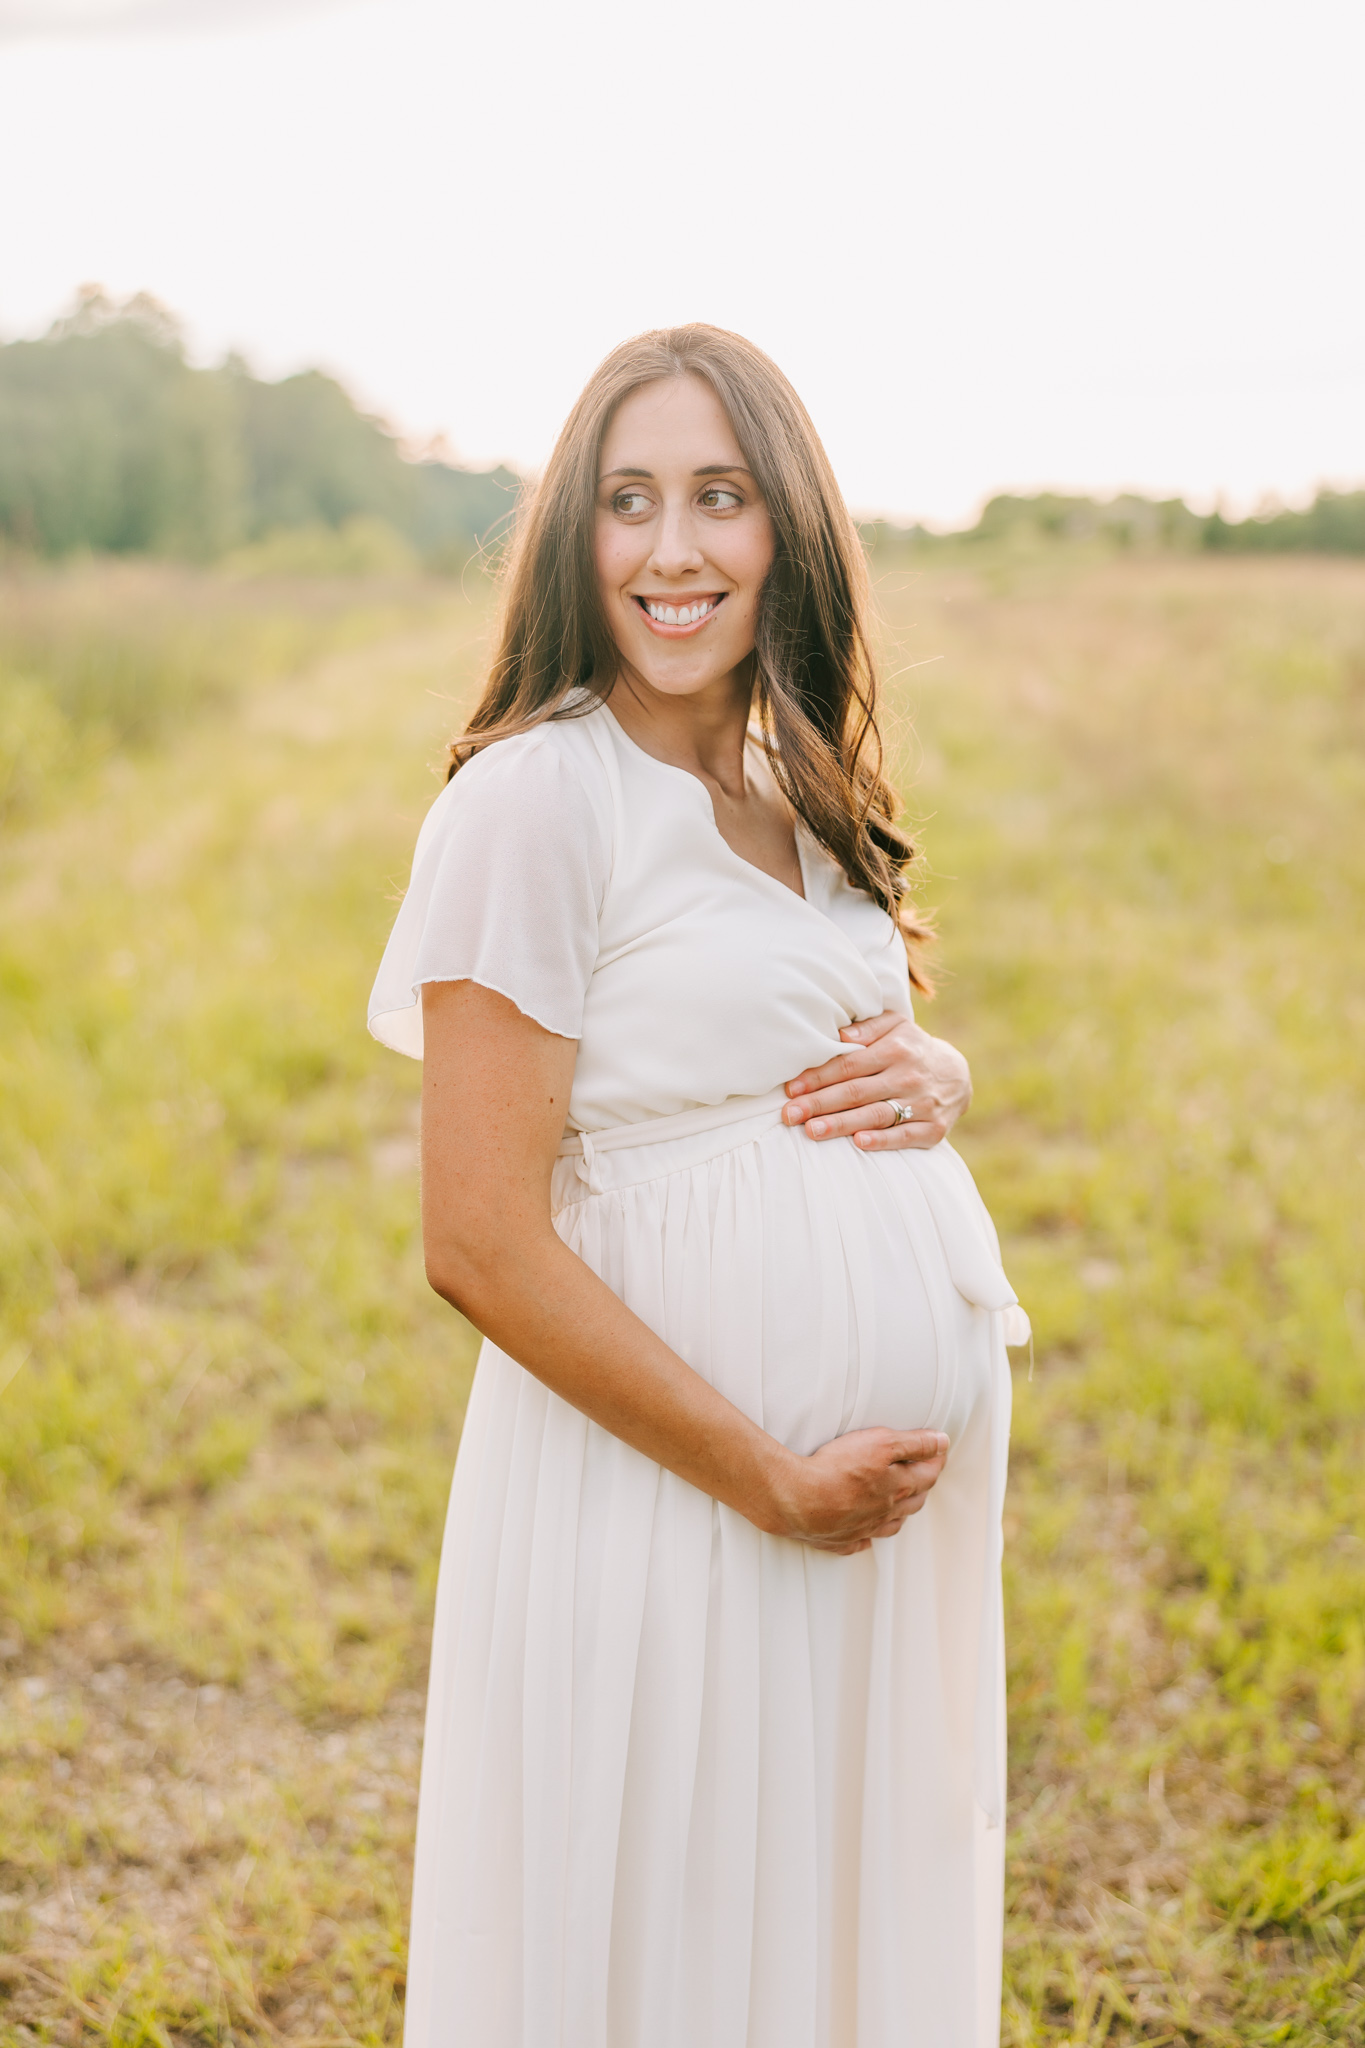 expecting mom holding her belly during her maternity session. Mom is wearing a white dress.